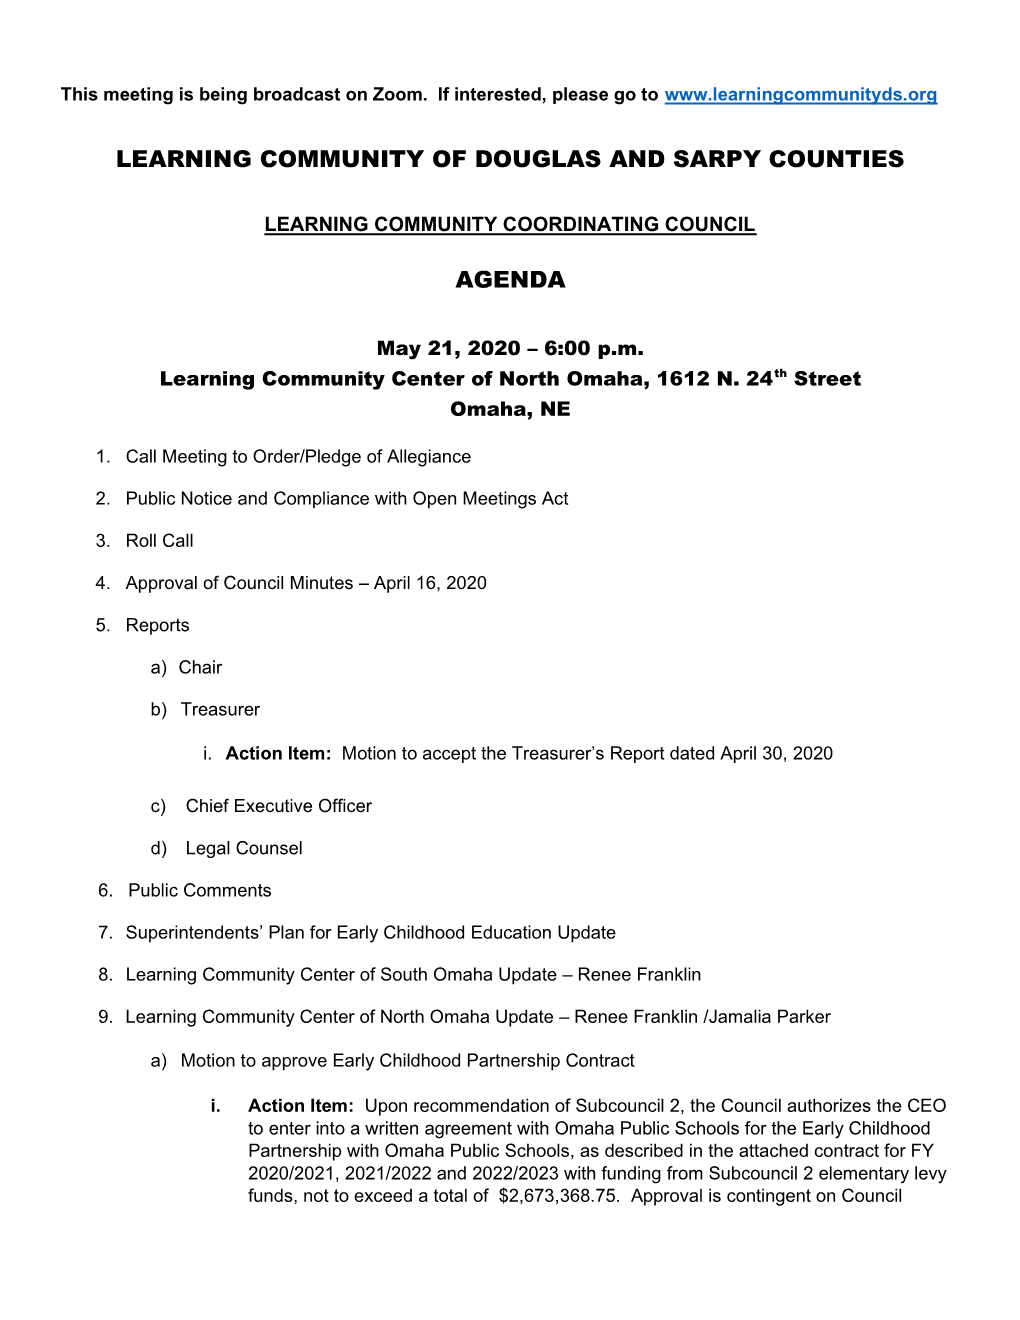 Learning Community of Douglas and Sarpy Counties